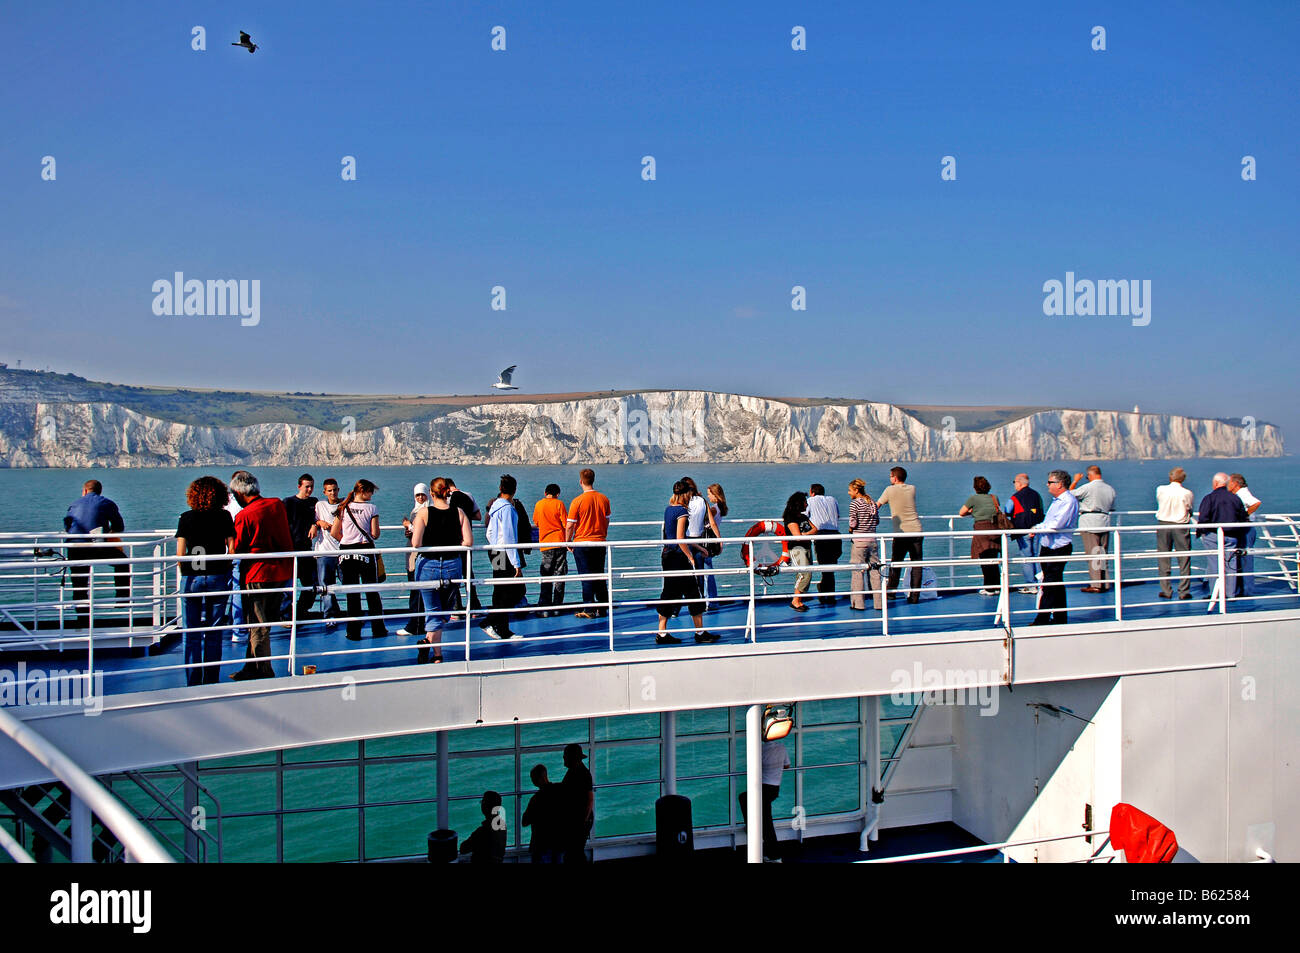 Passengers on a ferry viewing the white cliffs of Dover, Dover, England, Great Britain, Europe Stock Photo